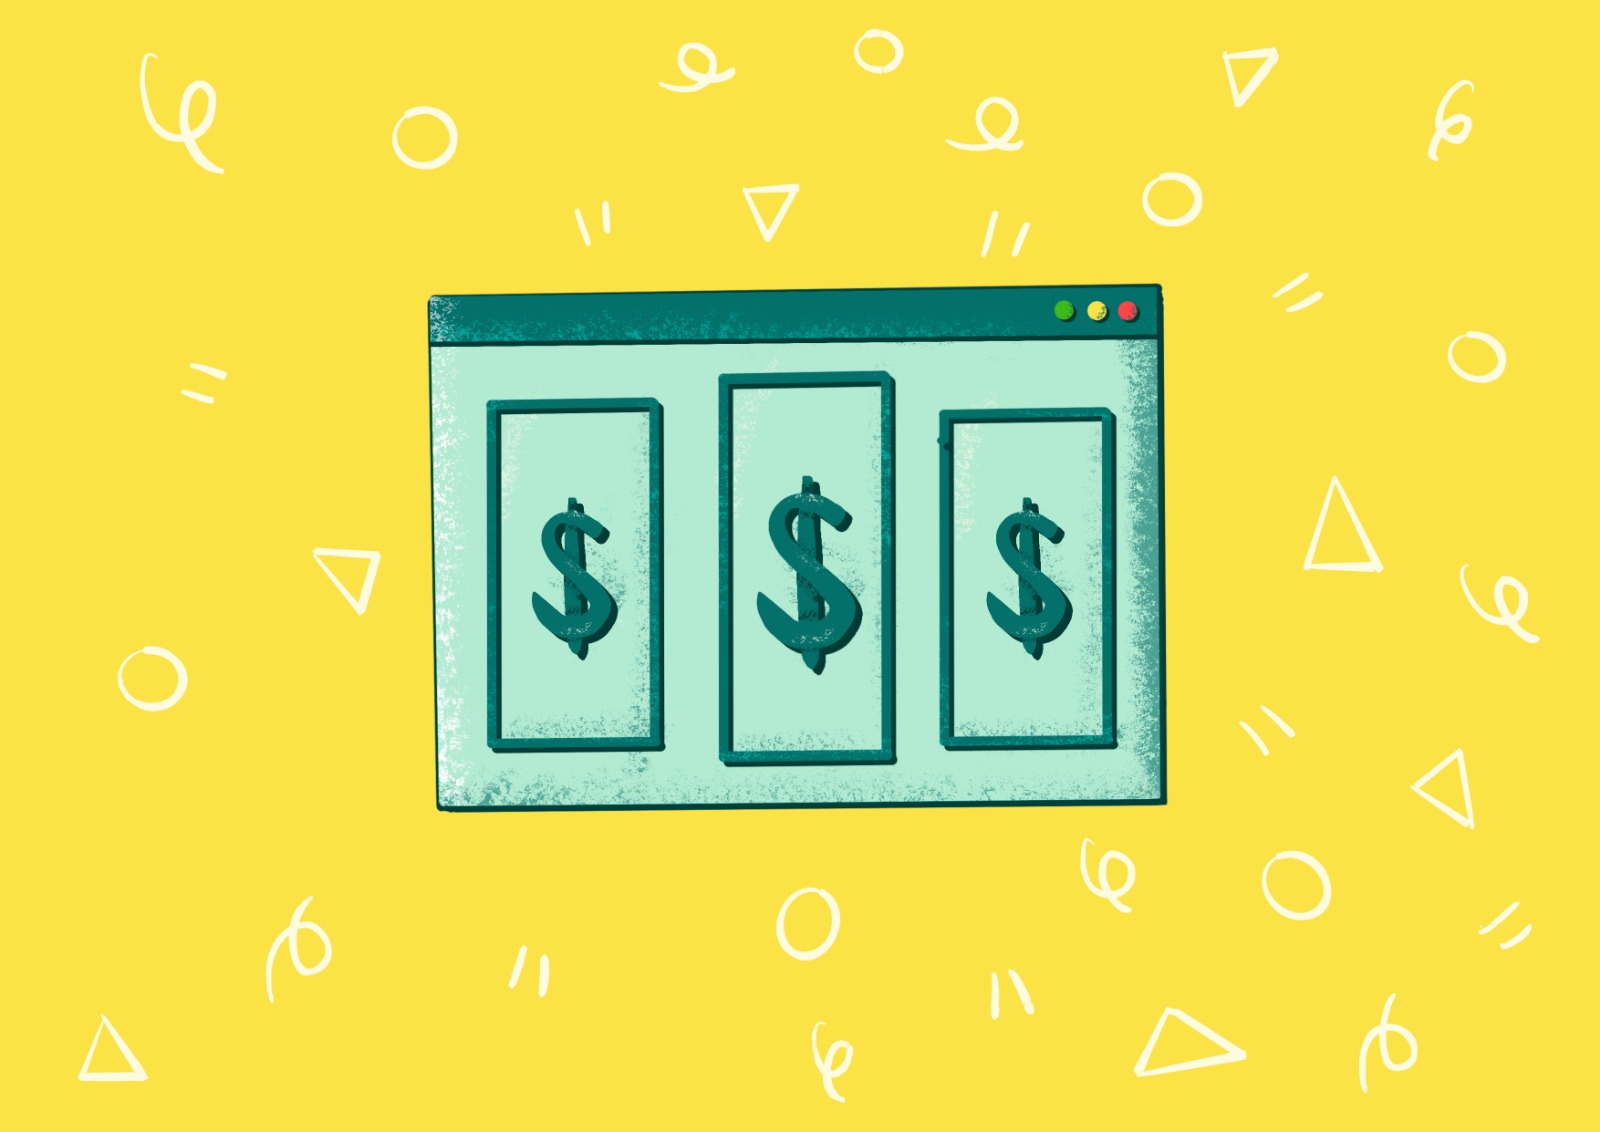 Abstract illustration of a browser screen with 3 dollar bills taking up the screen